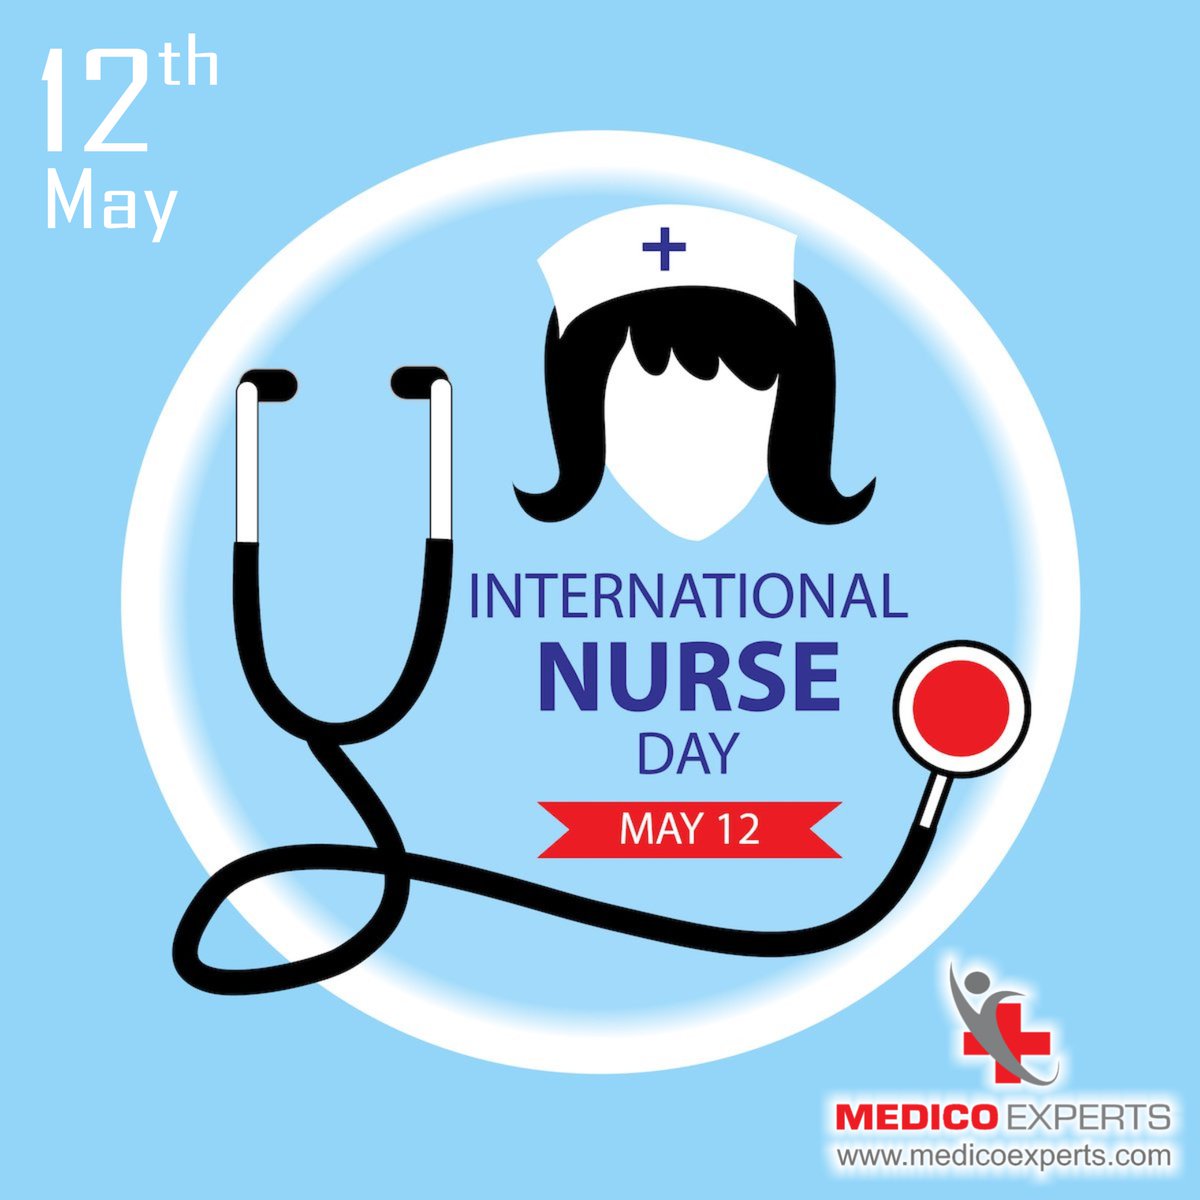 Today and every day, let's honor the incredible dedication and compassion of nurses around the world. Happy International Nurse Day! 🌍💉 #NursesRock #HealthcareHeroes #InternationalNurseDay